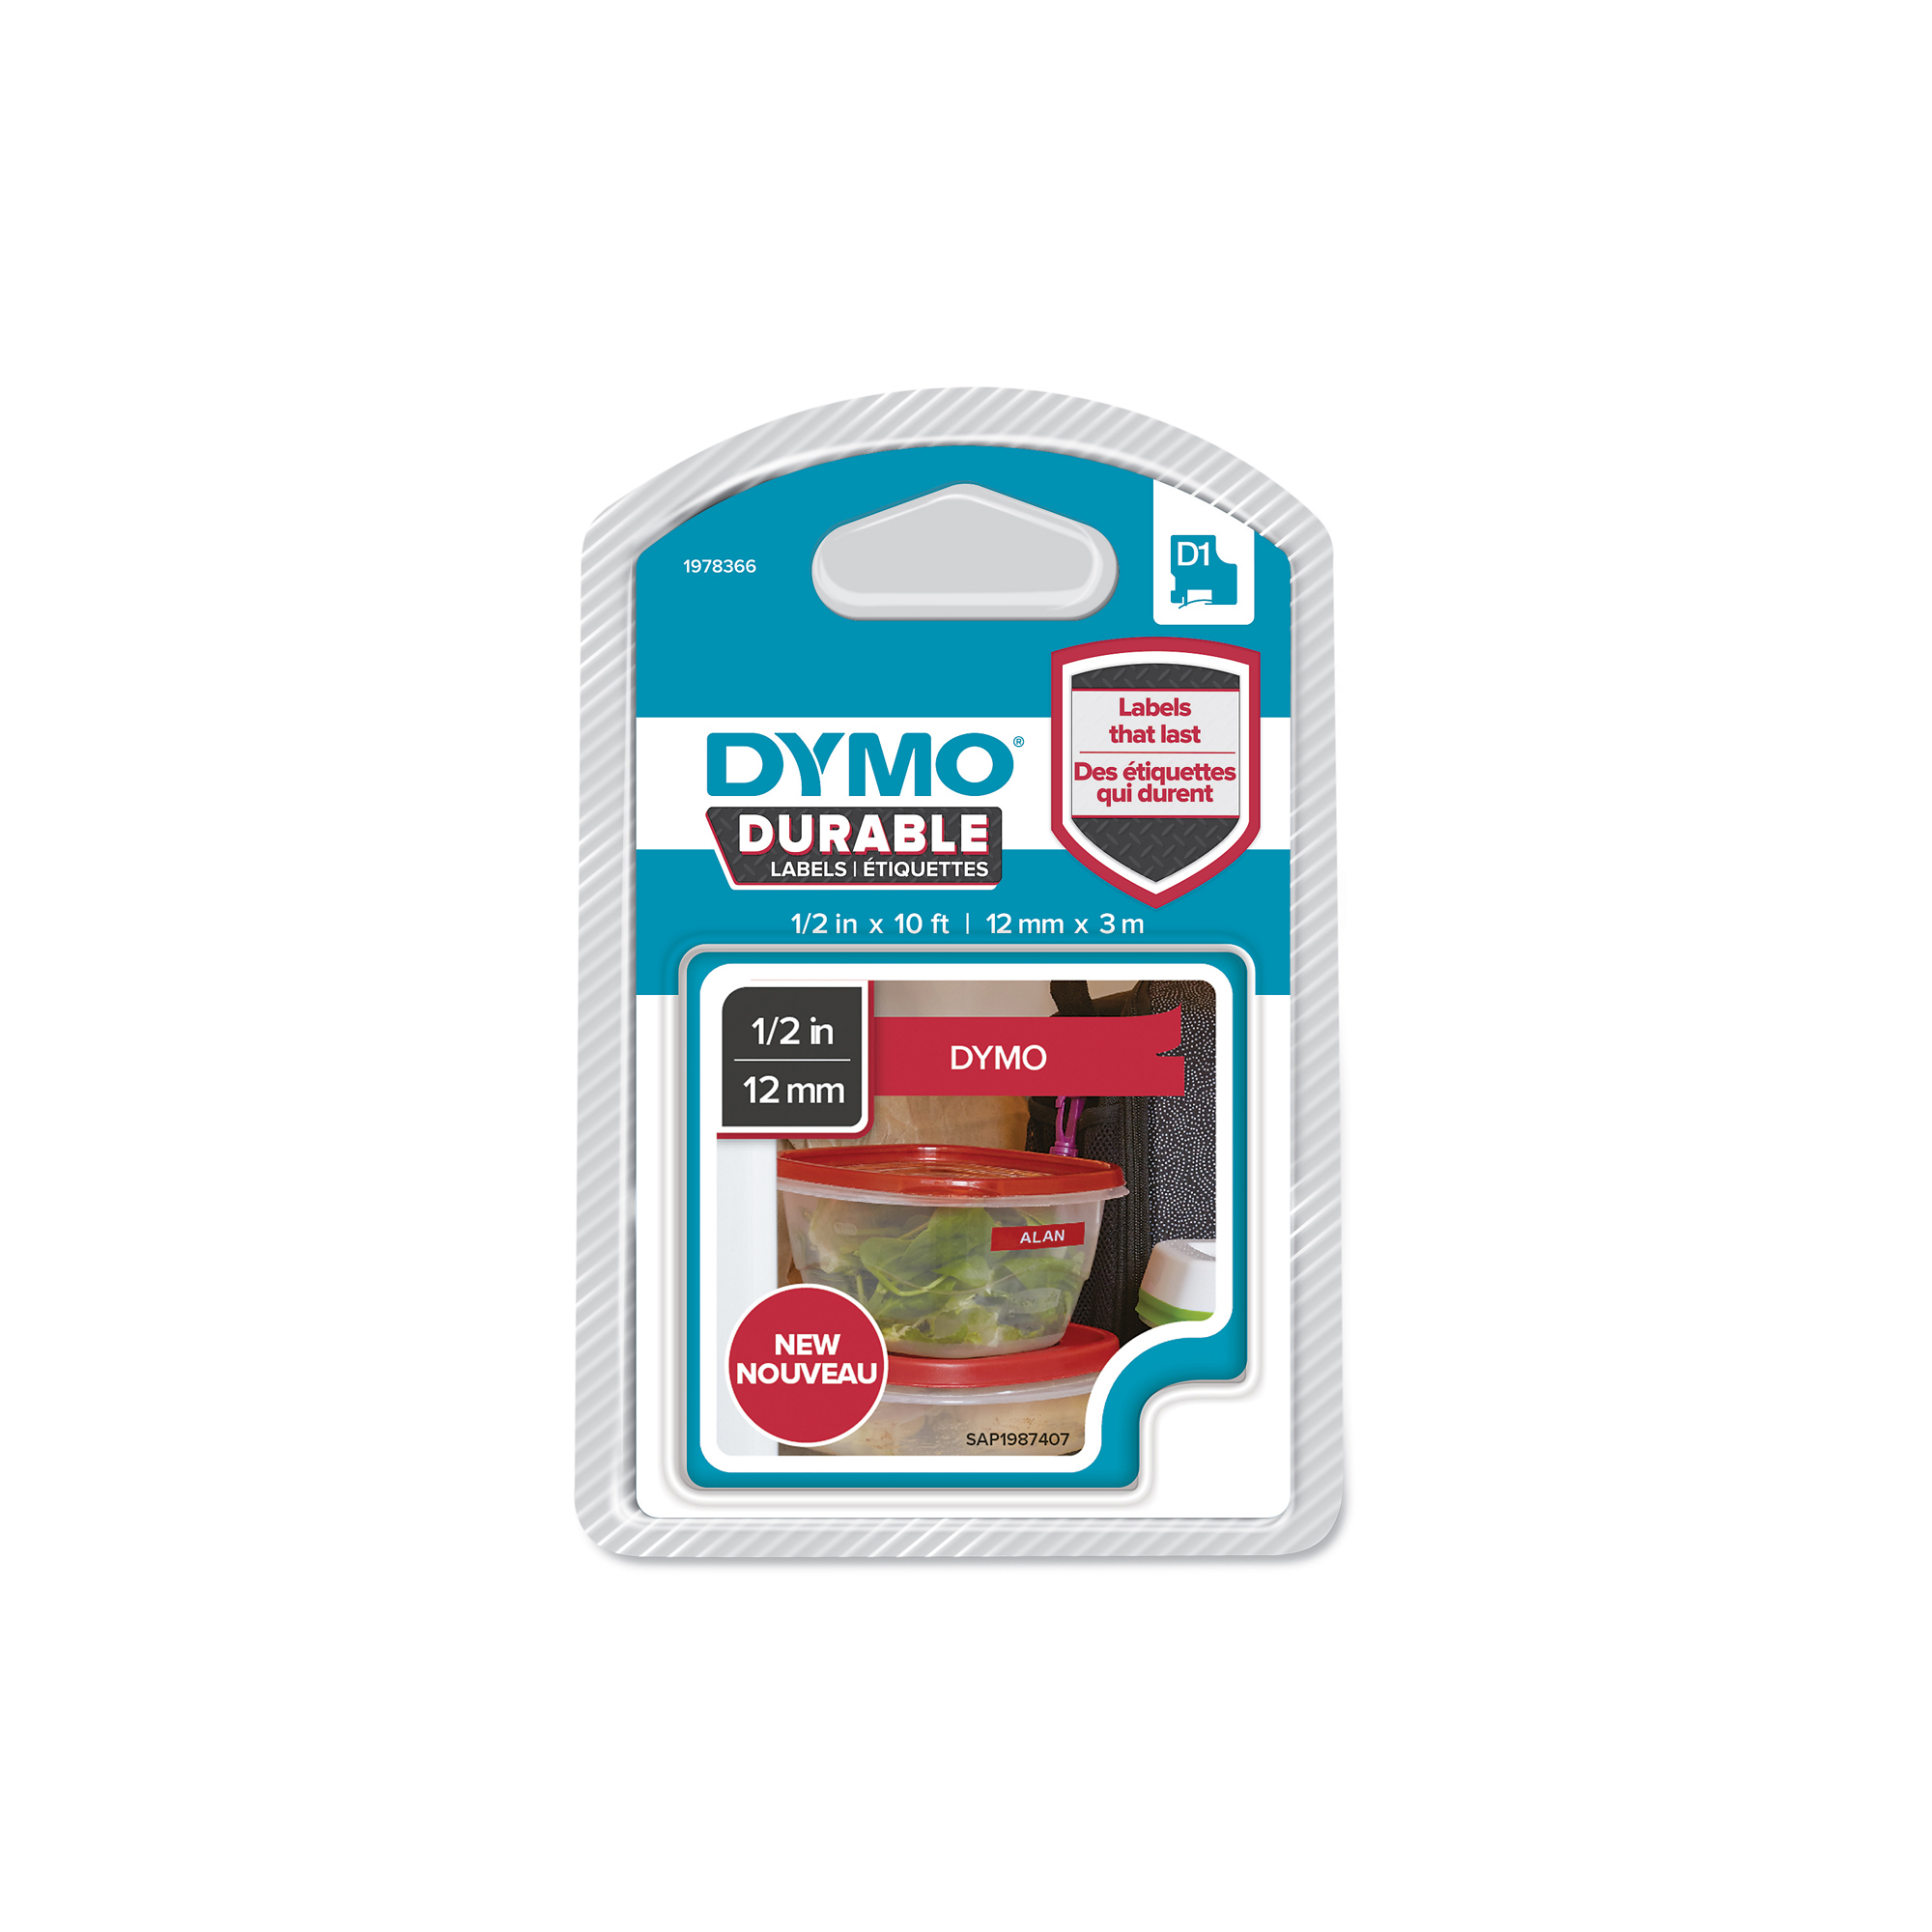 Nastro Dymo Tipo D1 Durable 12mmx3mt Bianco Rosso 1978366 1978366 3501179783666